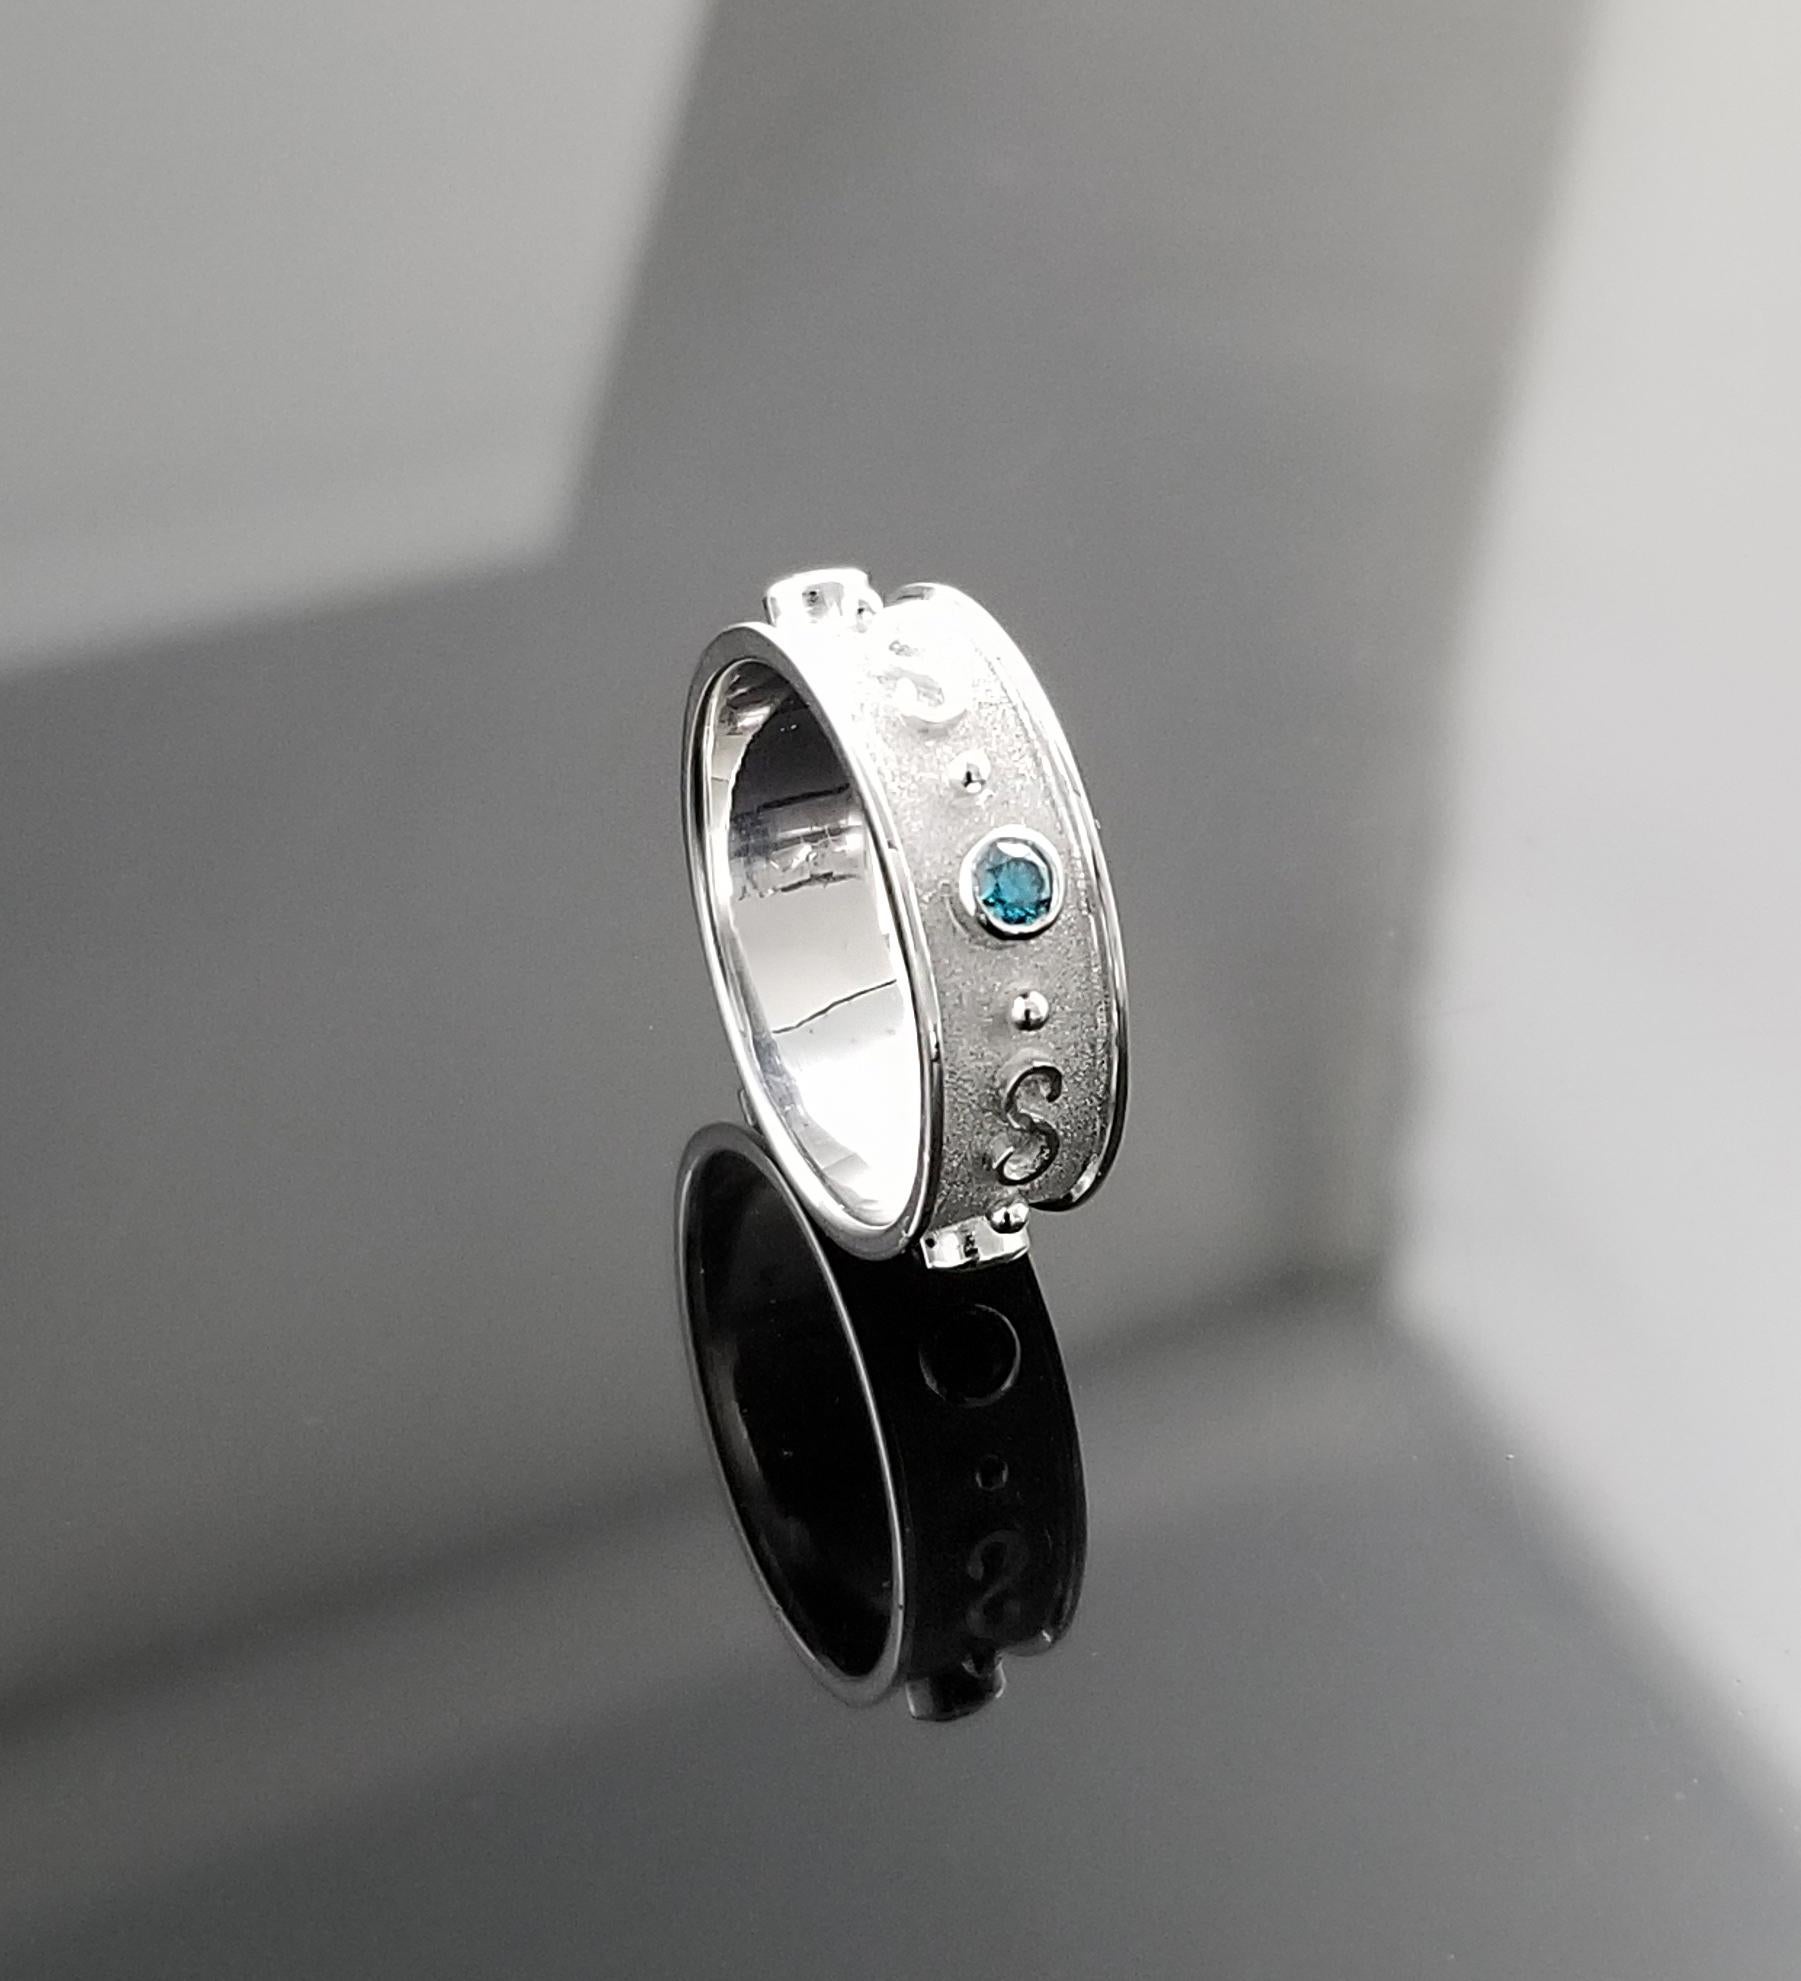 S.Georgios design Ring is handmade from solid 18 Karat White Gold and is microscopically decorated with Granulation work all the way around with white gold beads and wires shaped like the symbol of long life, the Greek Key Design. This gorgeous band